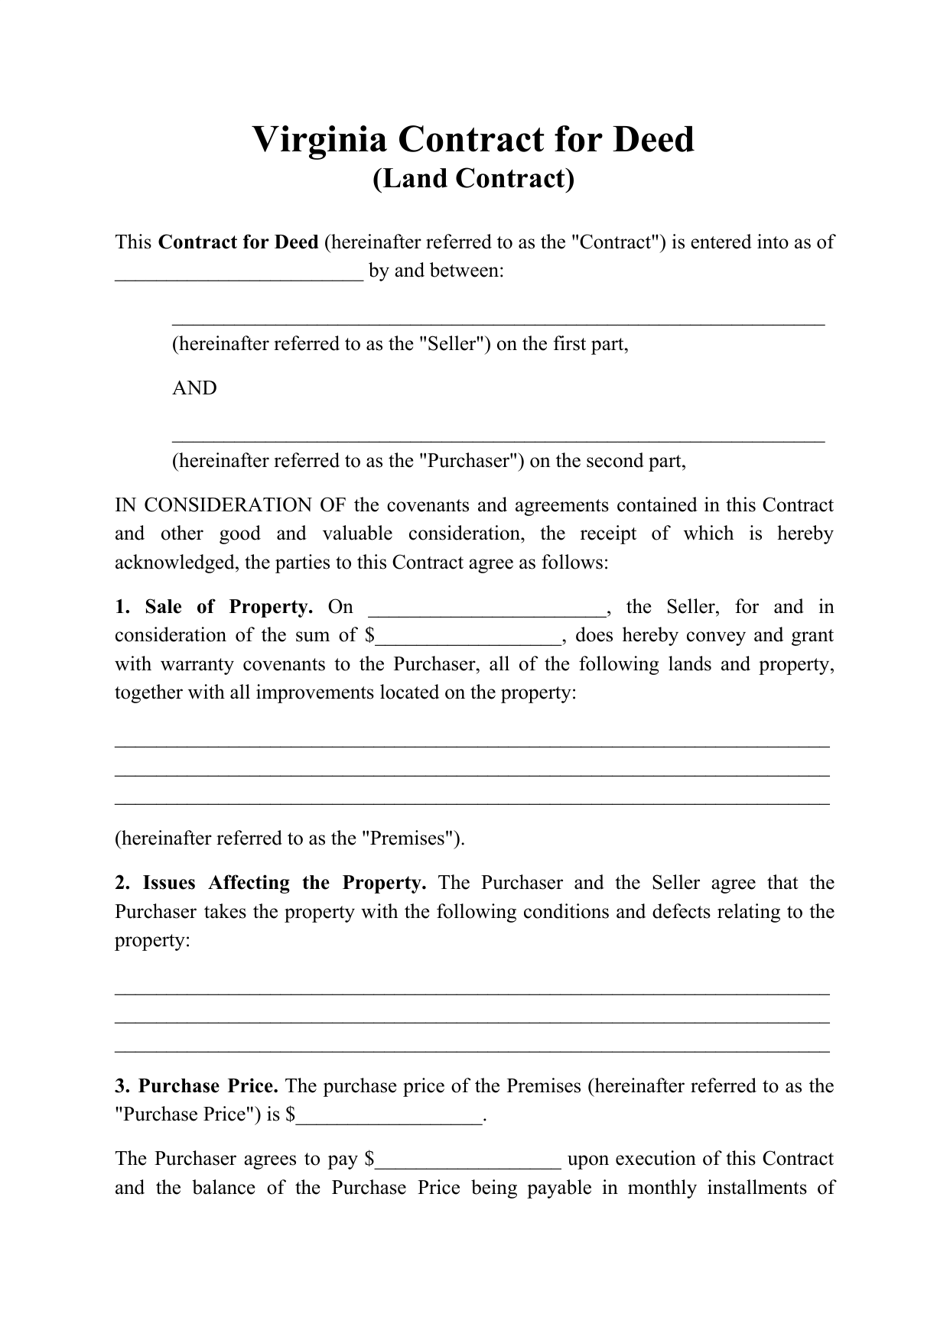 Contract for Deed (Land Contract) - Virginia, Page 1